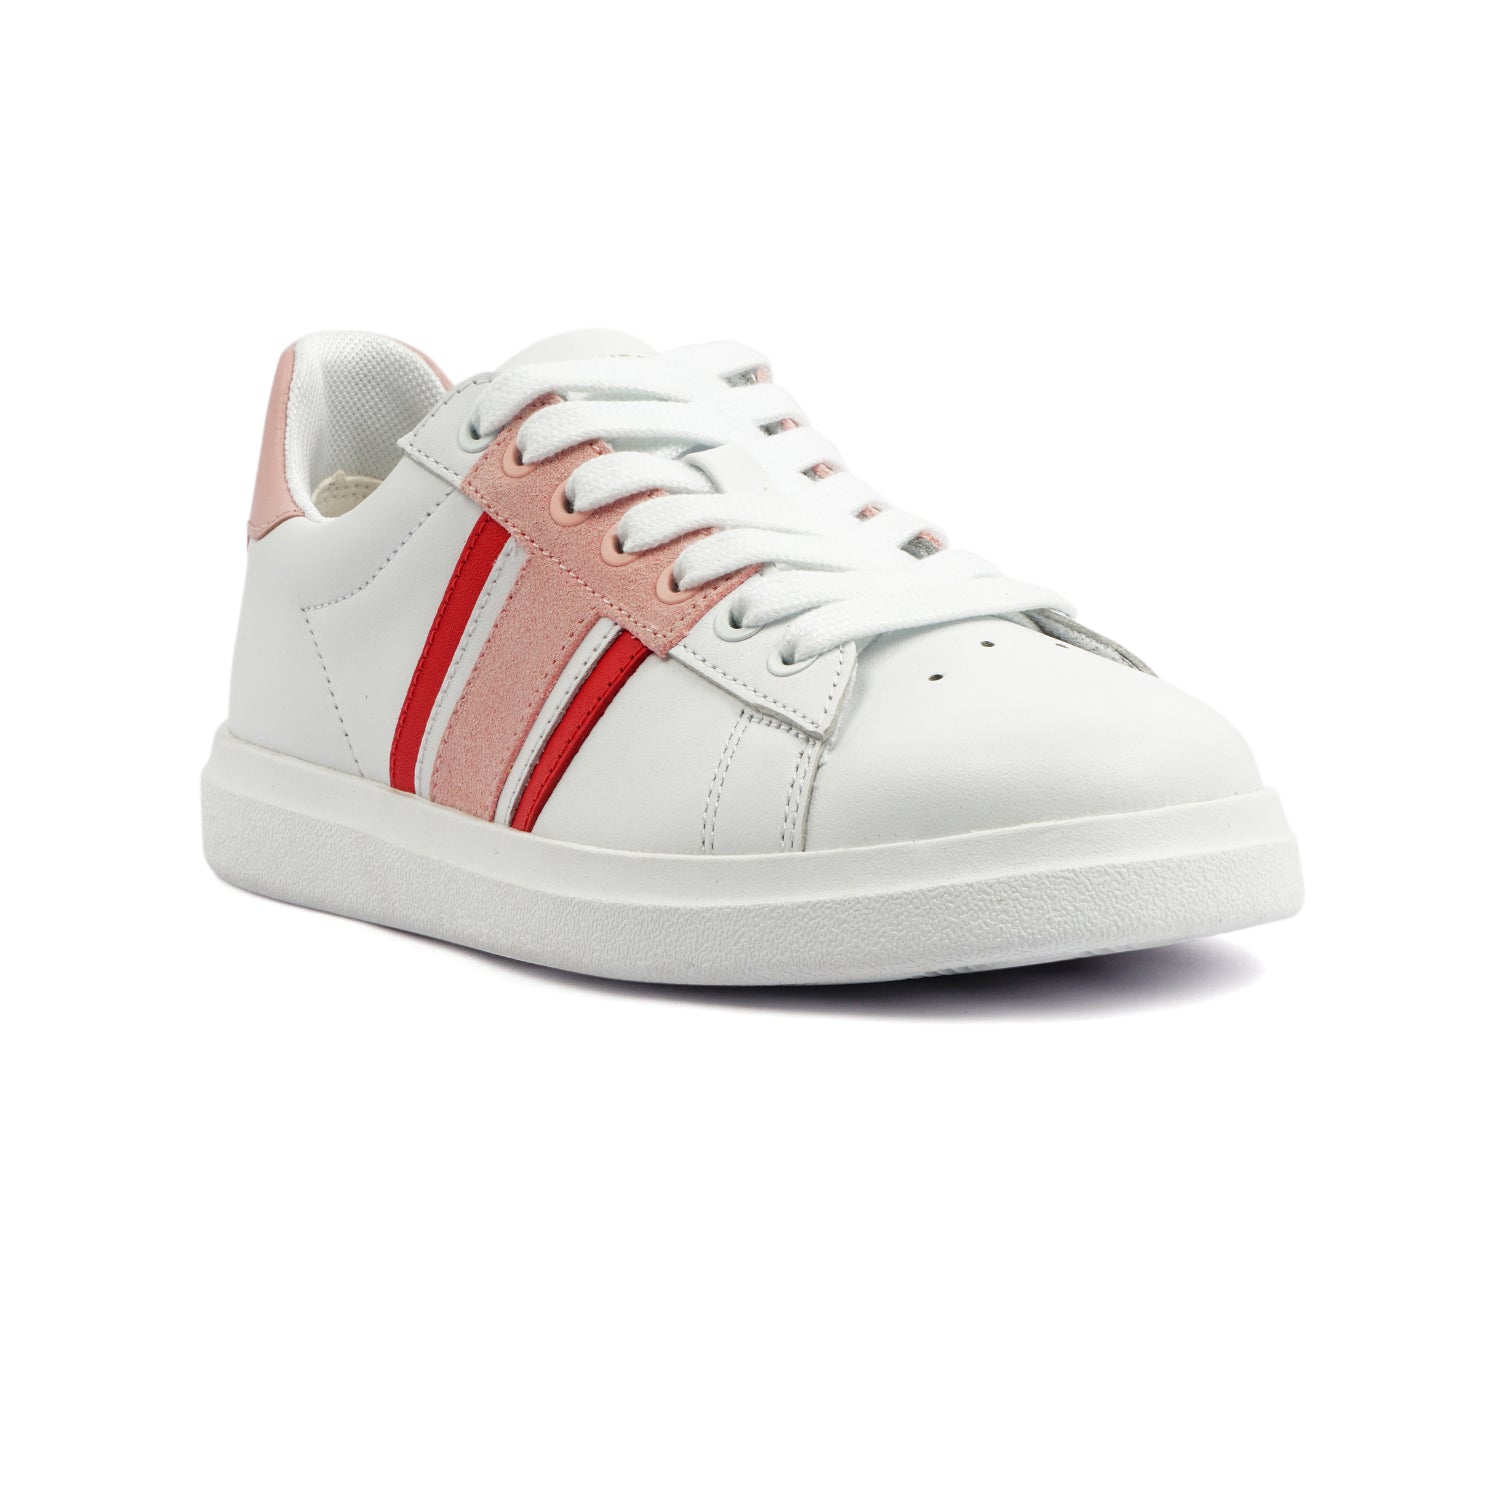 TORY BURCH HOWELL T-SADDLE COURT IN WHITE